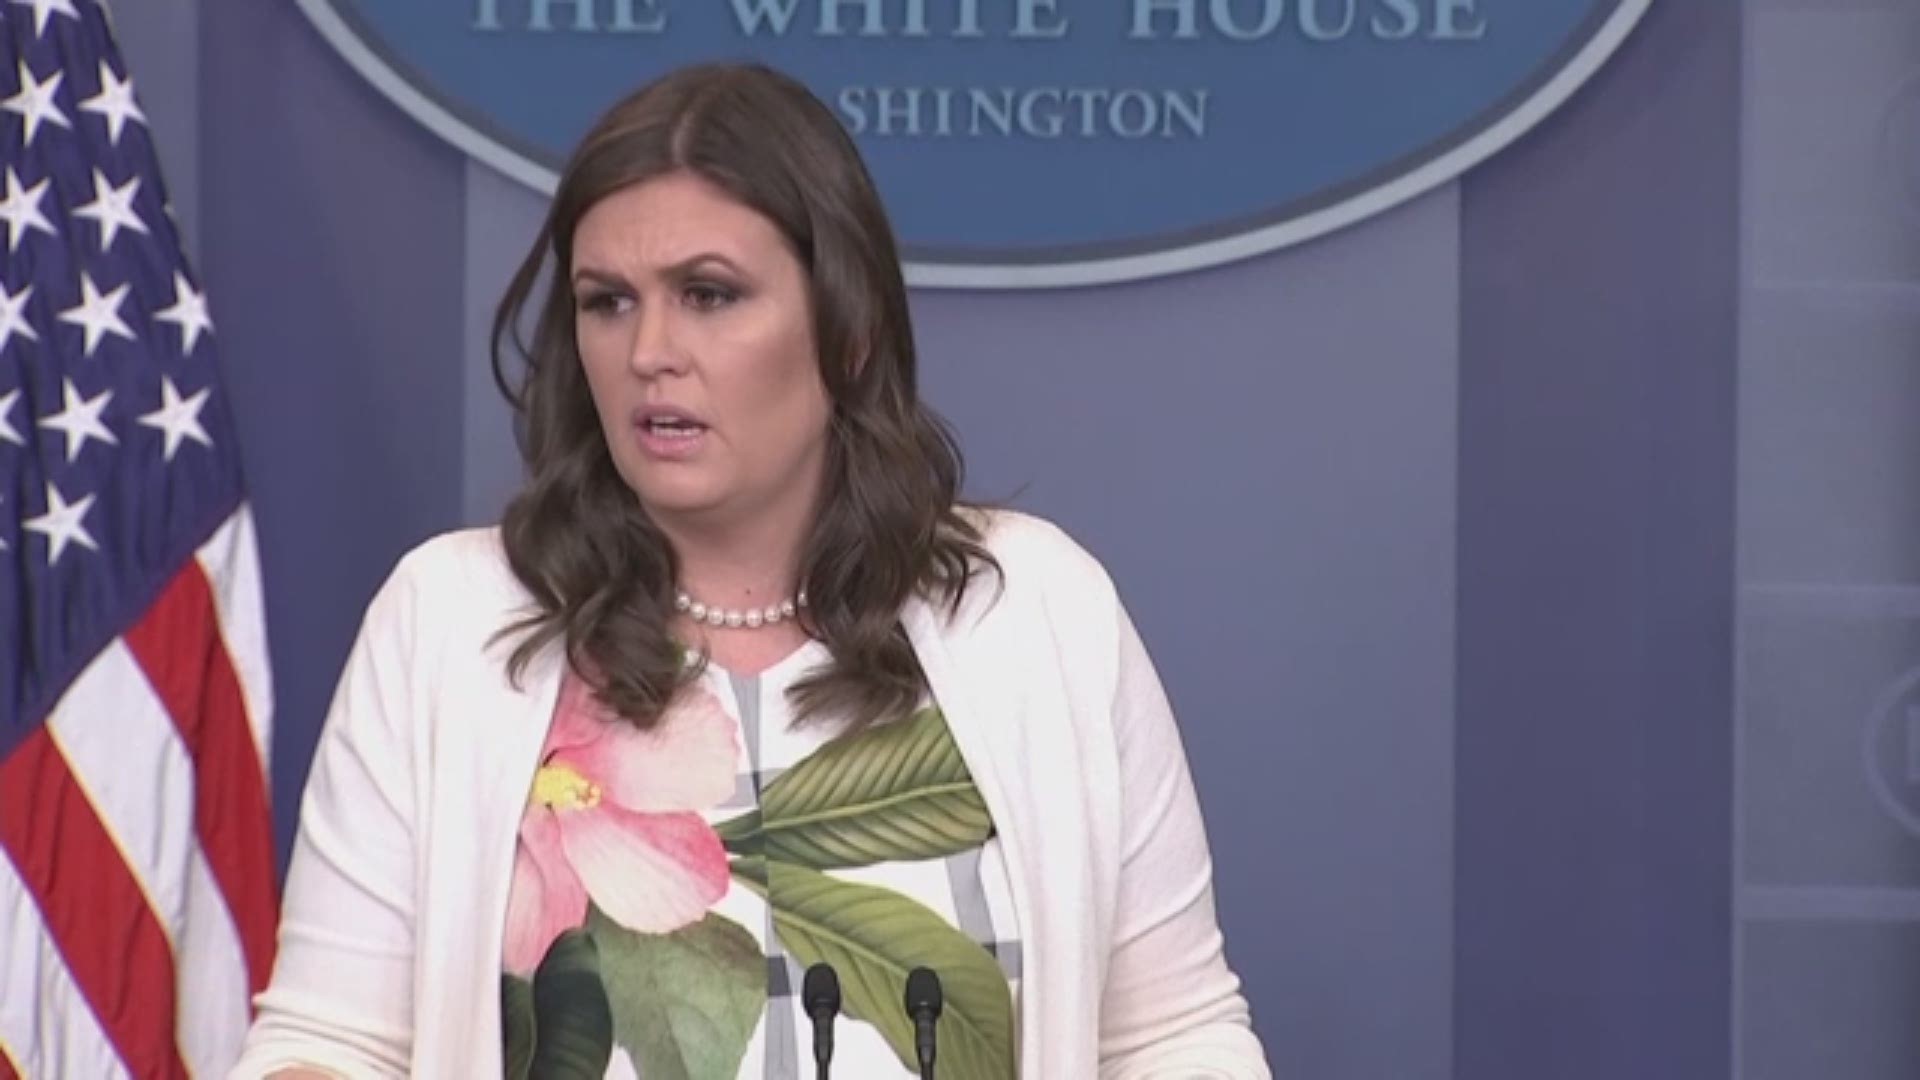 White House Press Secretary Sarah Sanders said President Trump did not intend to make a racial slur when he called Sen. Elizabeth Warren "Pocahontas" during an Oval Office event with Navajo code talkers.